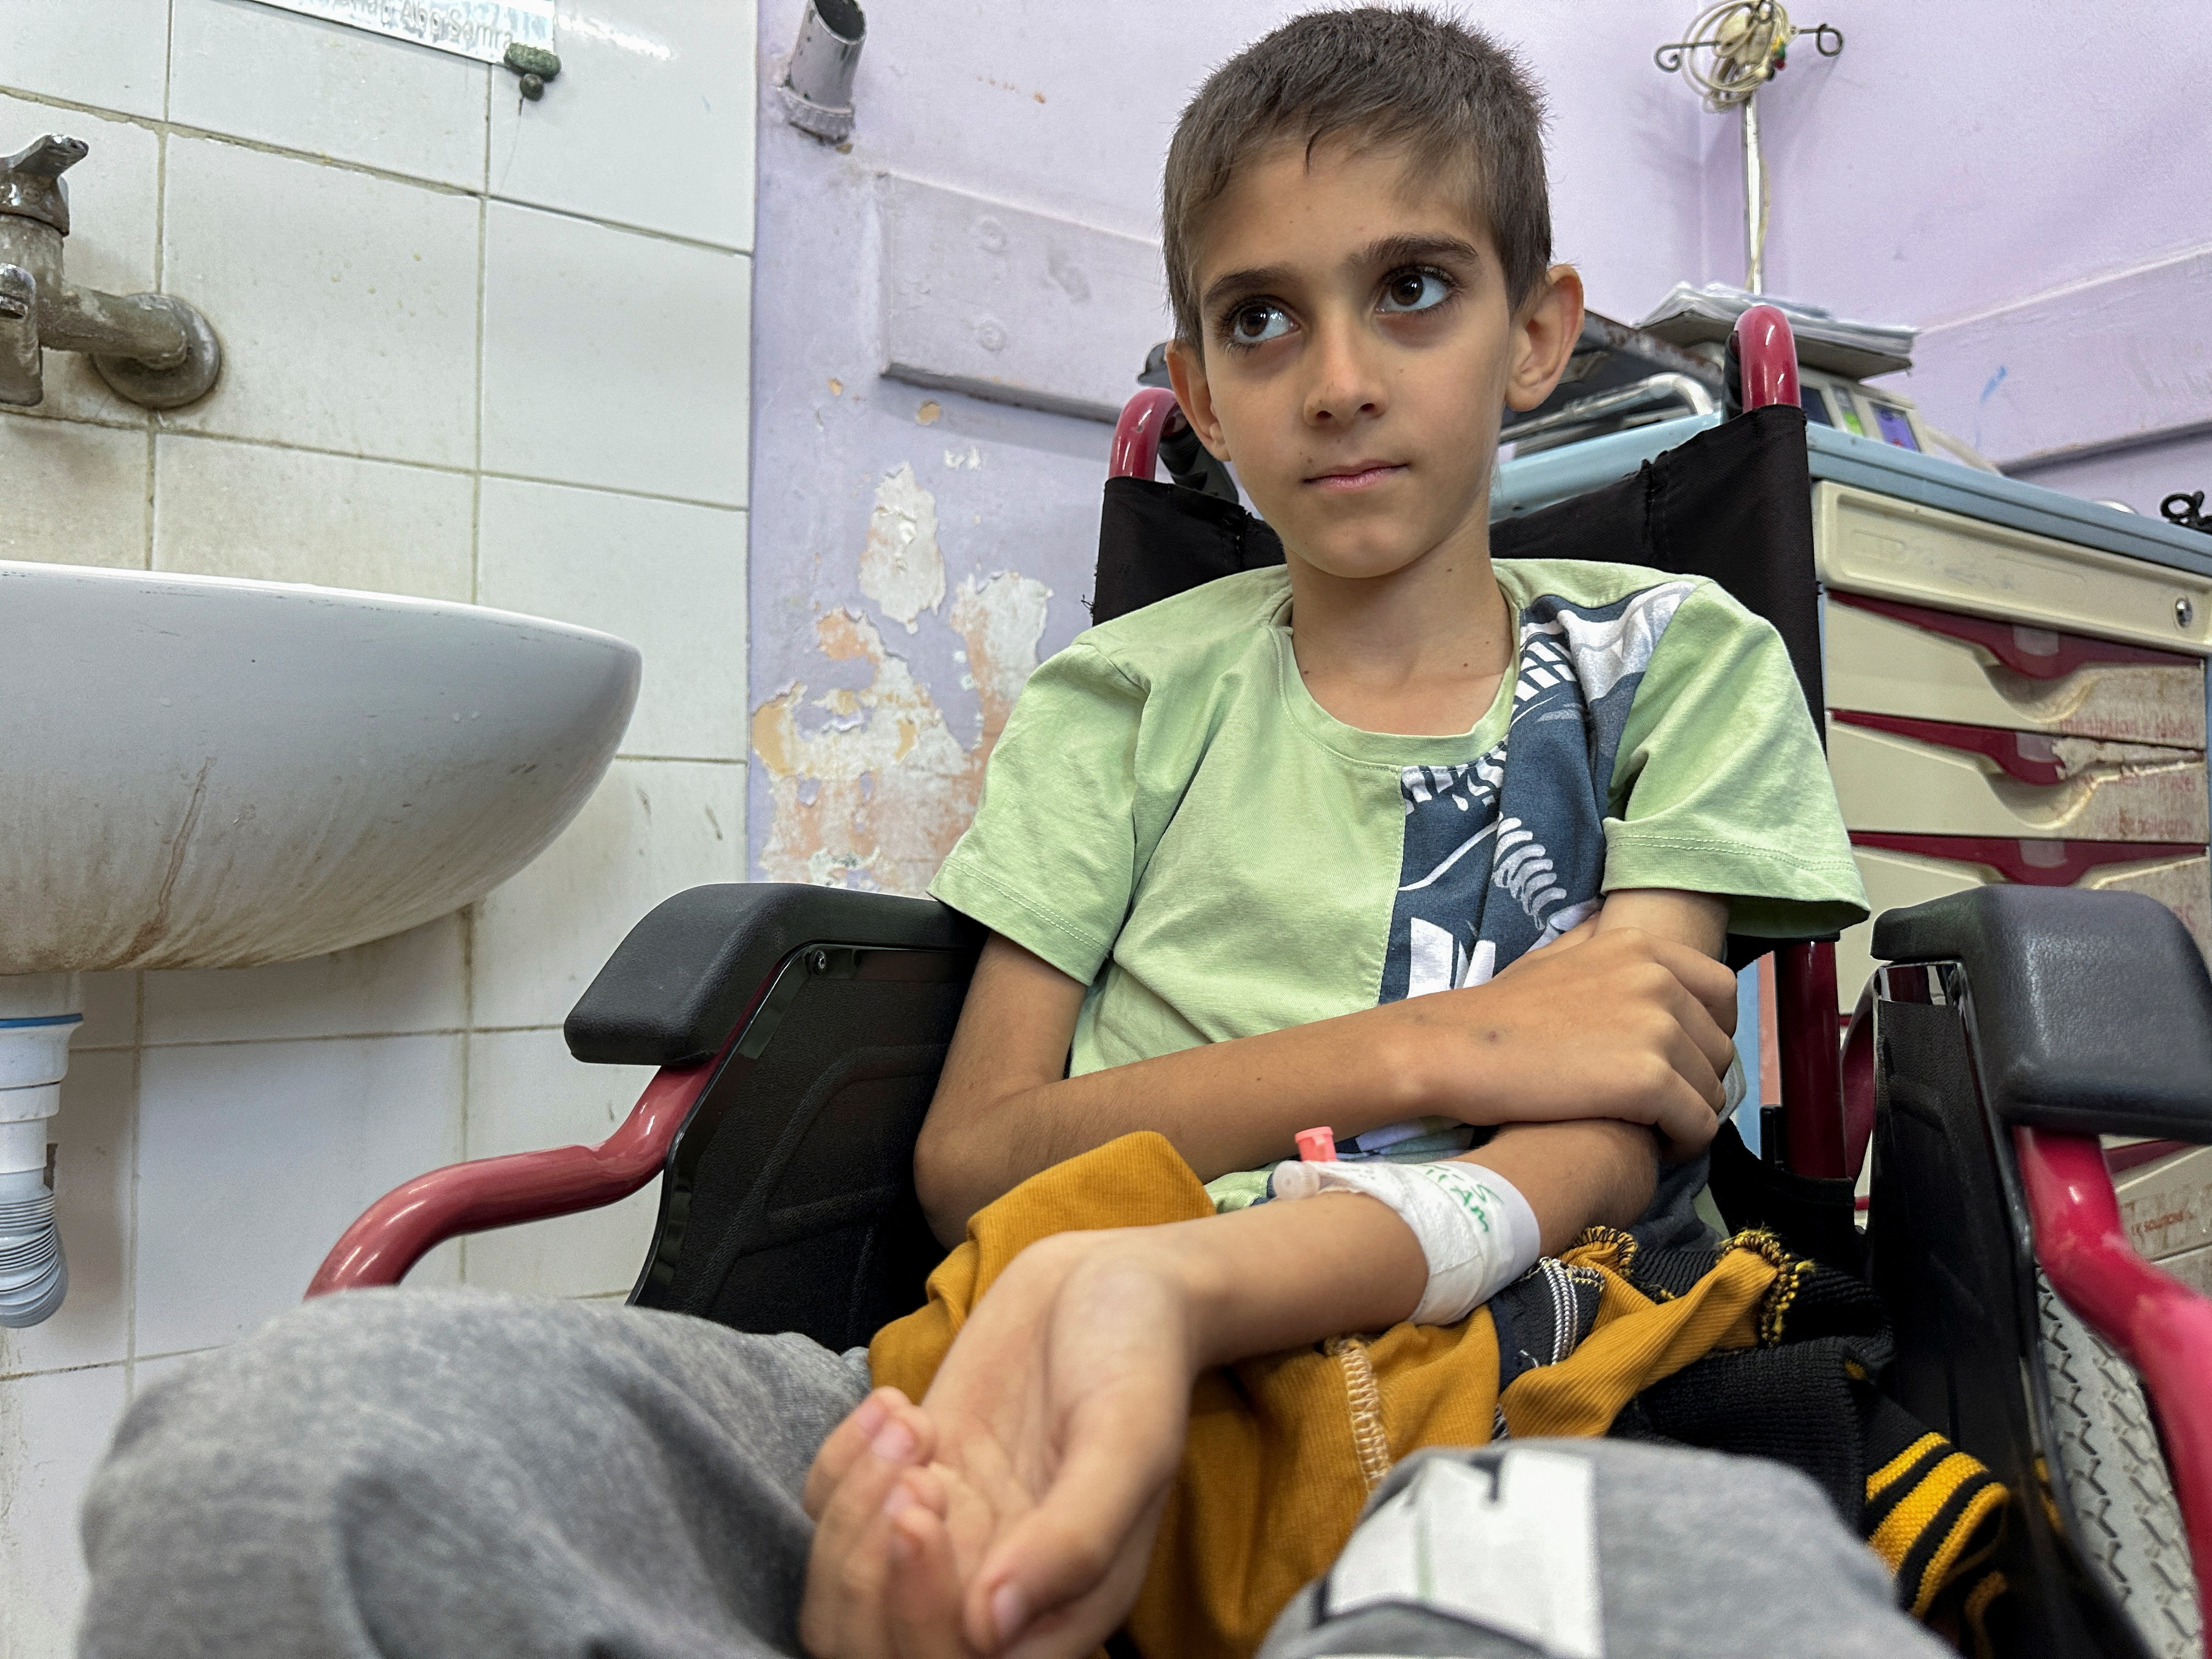 Gaza border closure shrinks 10-year-old cancer patient hopes for treatment abroad